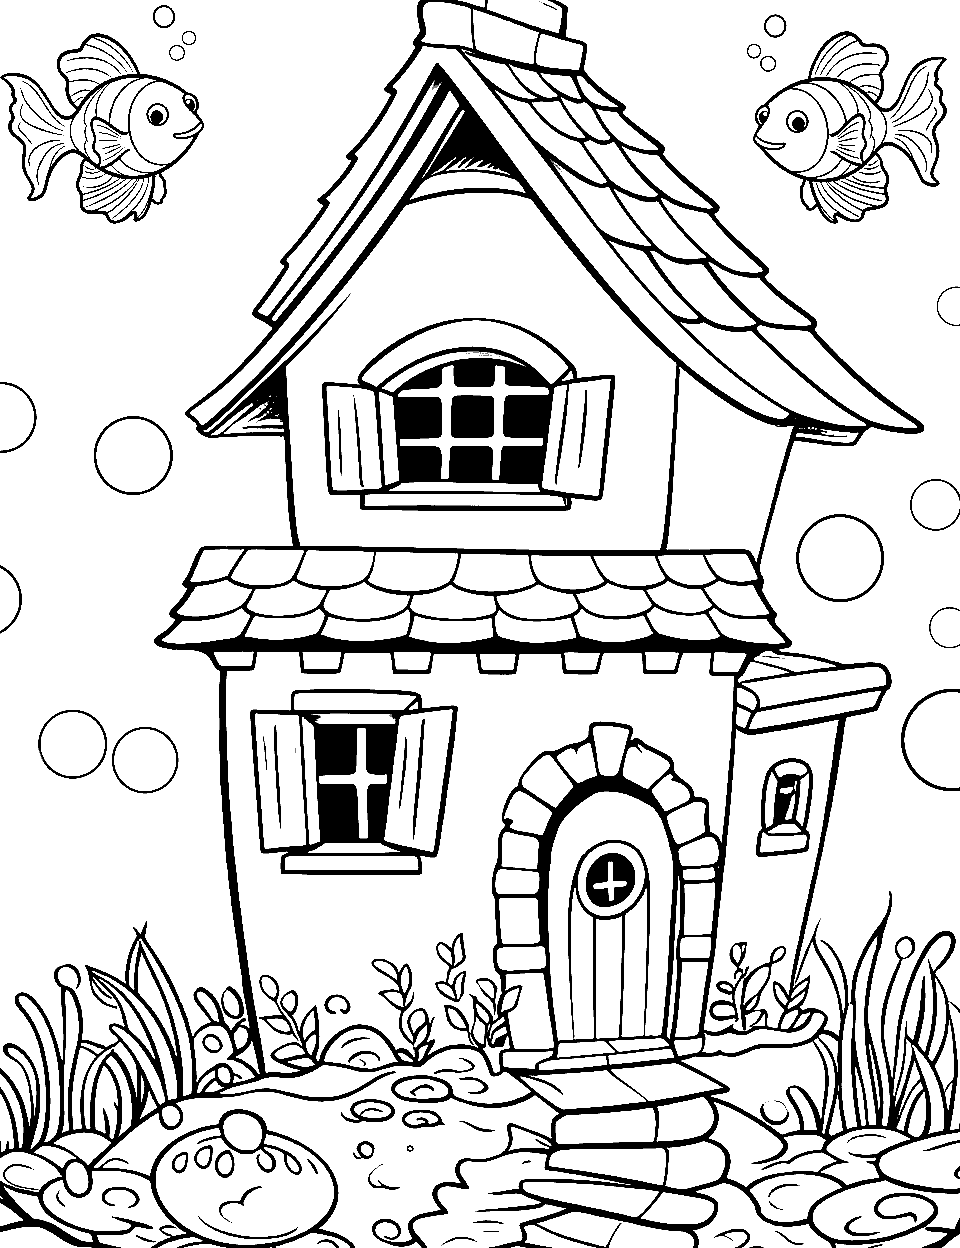 Underwater Fantasy Coloring Page - A submerged house with fishes swimming around.